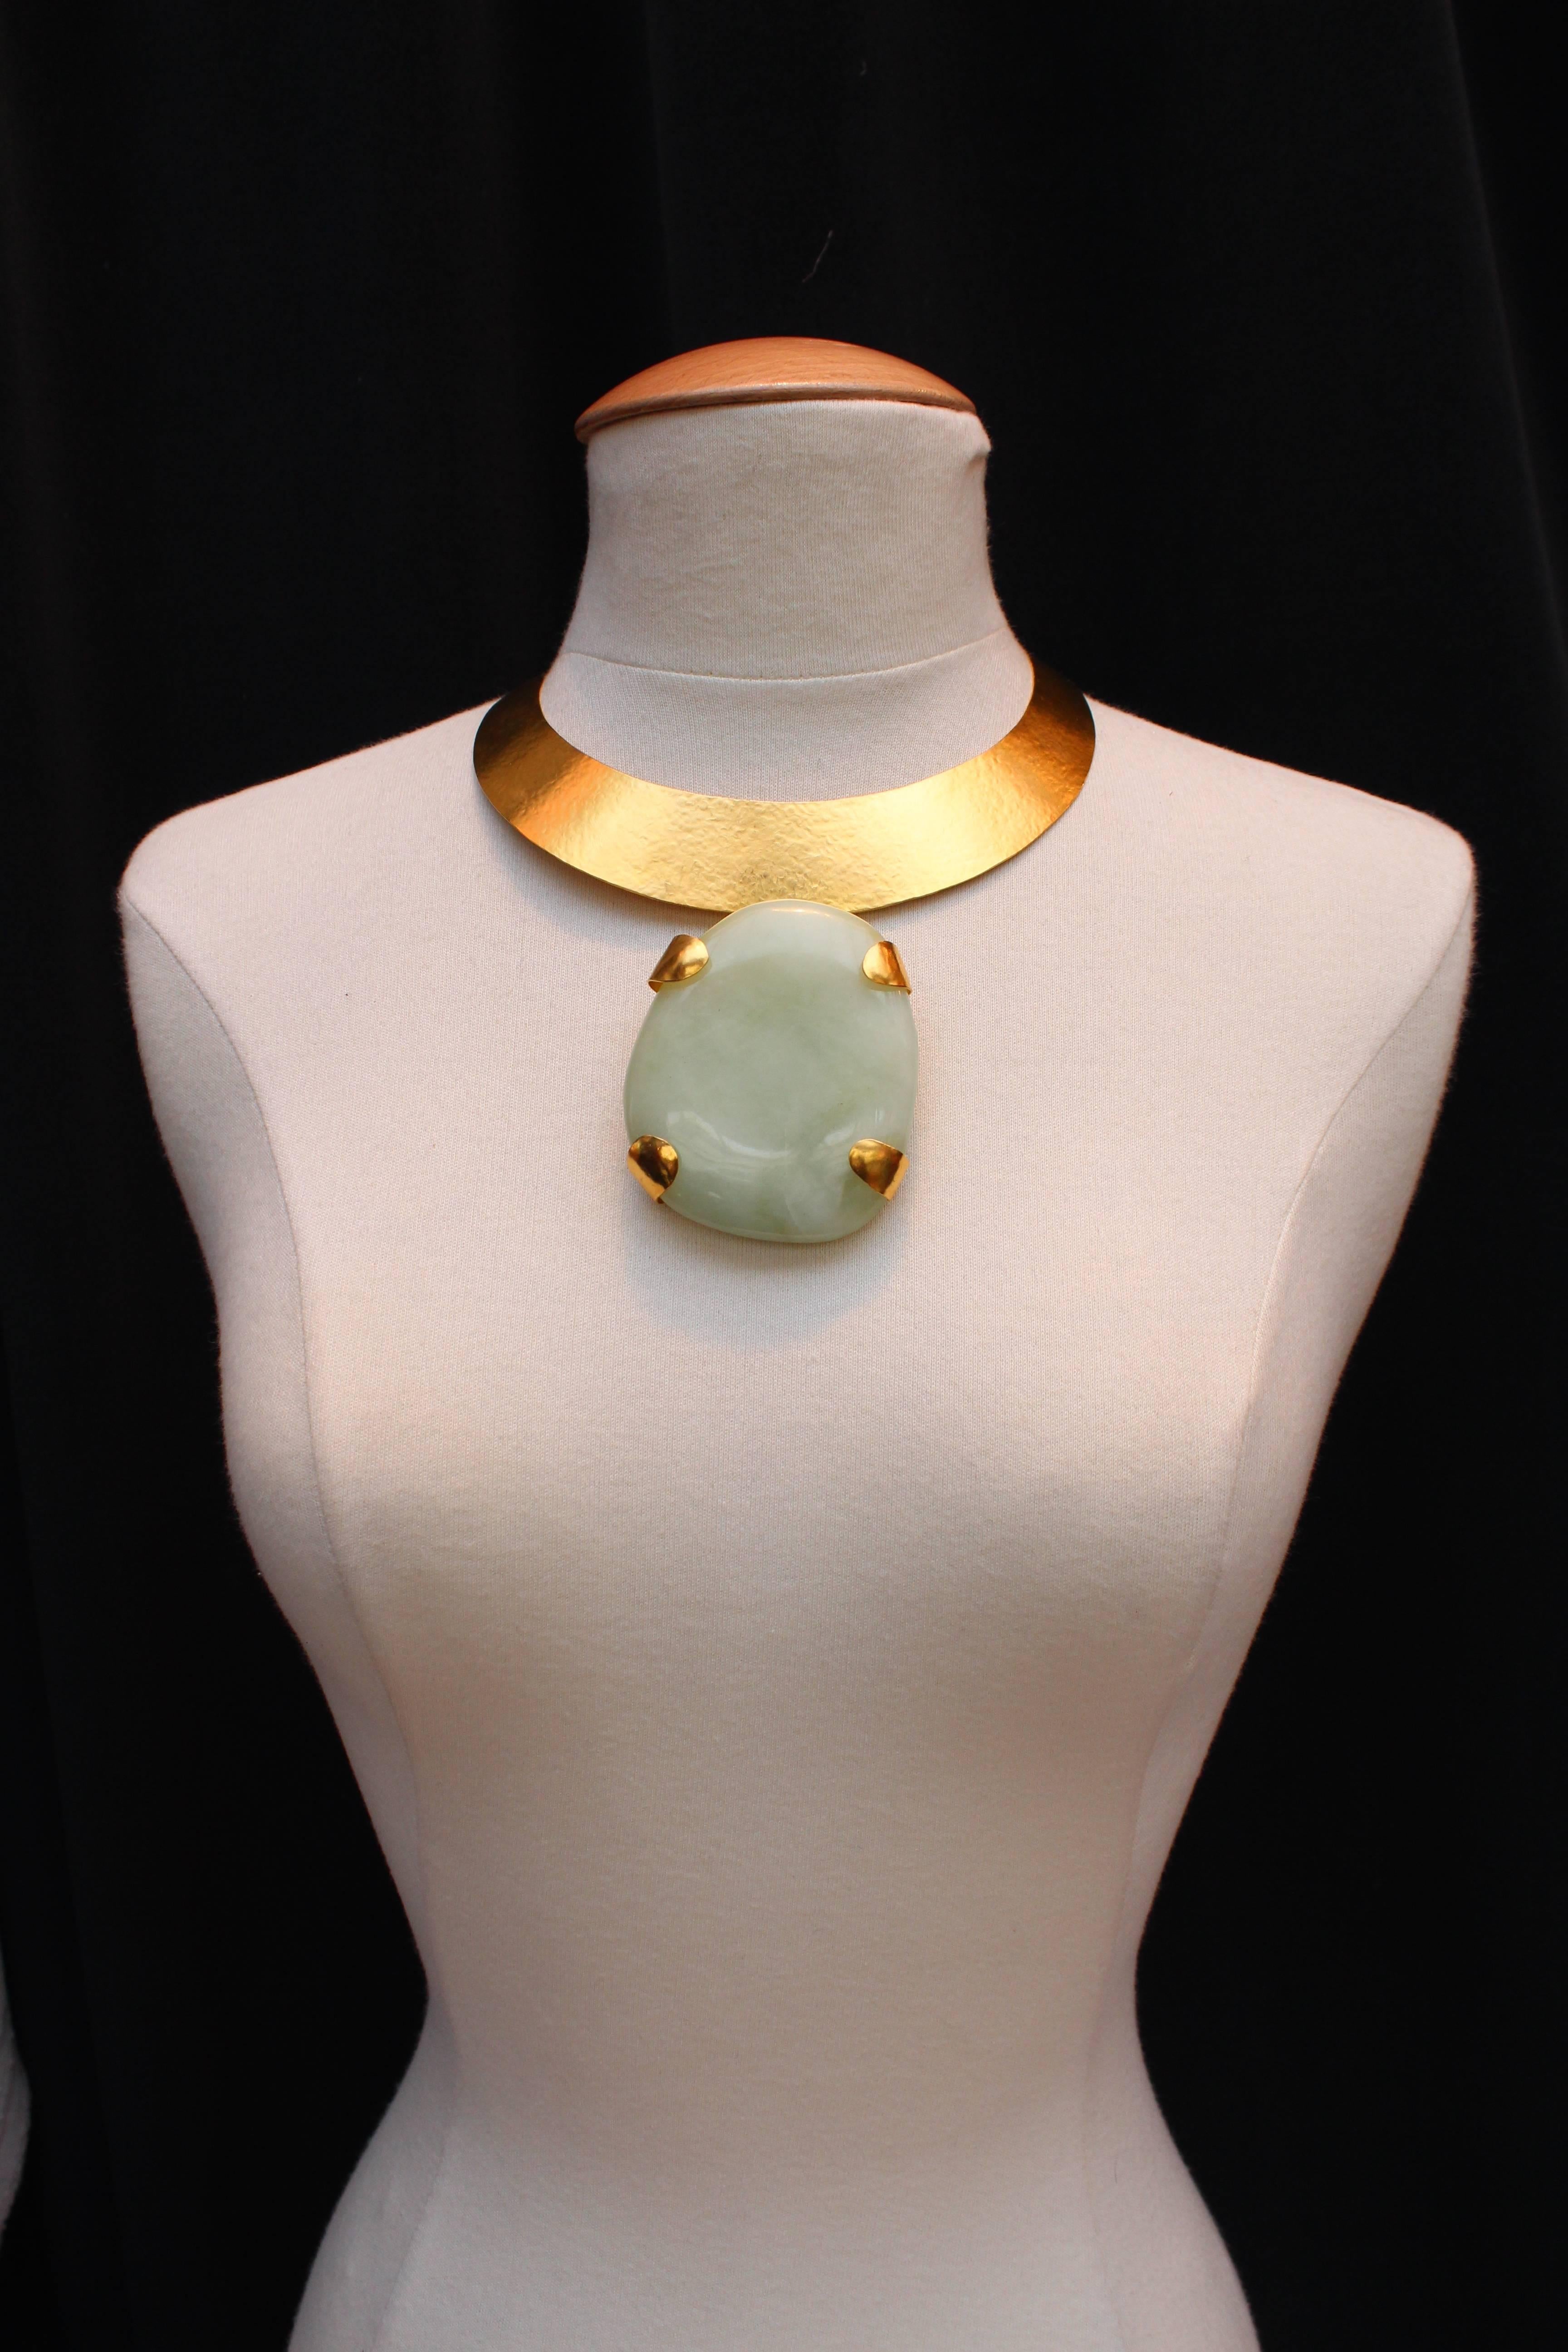 HERVE VAN DER STRAETEN Torque Necklace in polished and hammered gold brass holding a large green jadeite stone. It fastens in the neck with a S-hook and chain. 

Very good condition. 

Measurements:
Adjustable length from 37 cm to 42 cm;